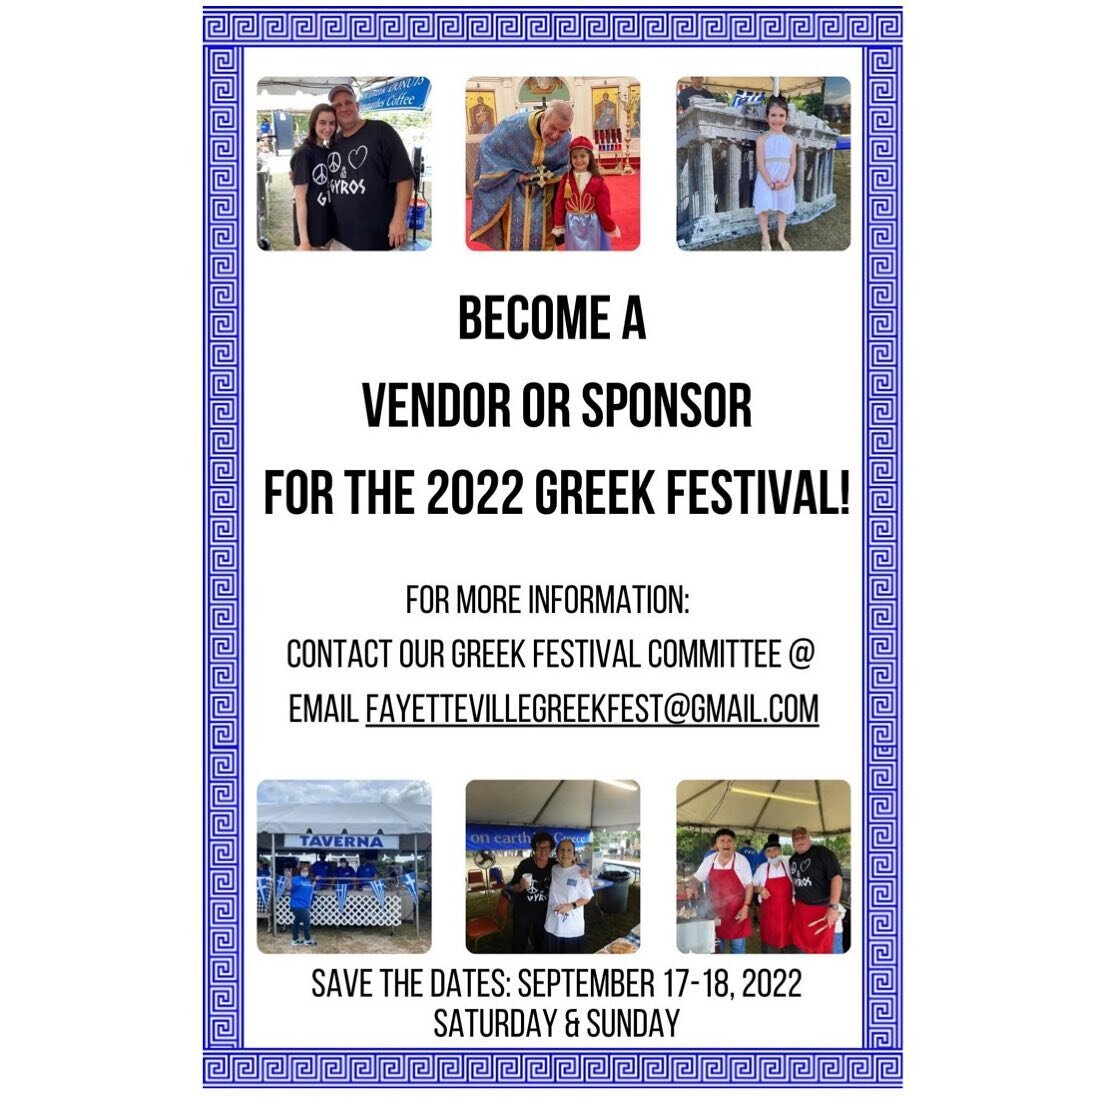 Want to join the fun at the Greek Festival? Become a vendor!

For More information: Email: fayettevilleGreekfest@gmail.com

By being a vendor at the Greek Fest, you can gain great exposure for your business.